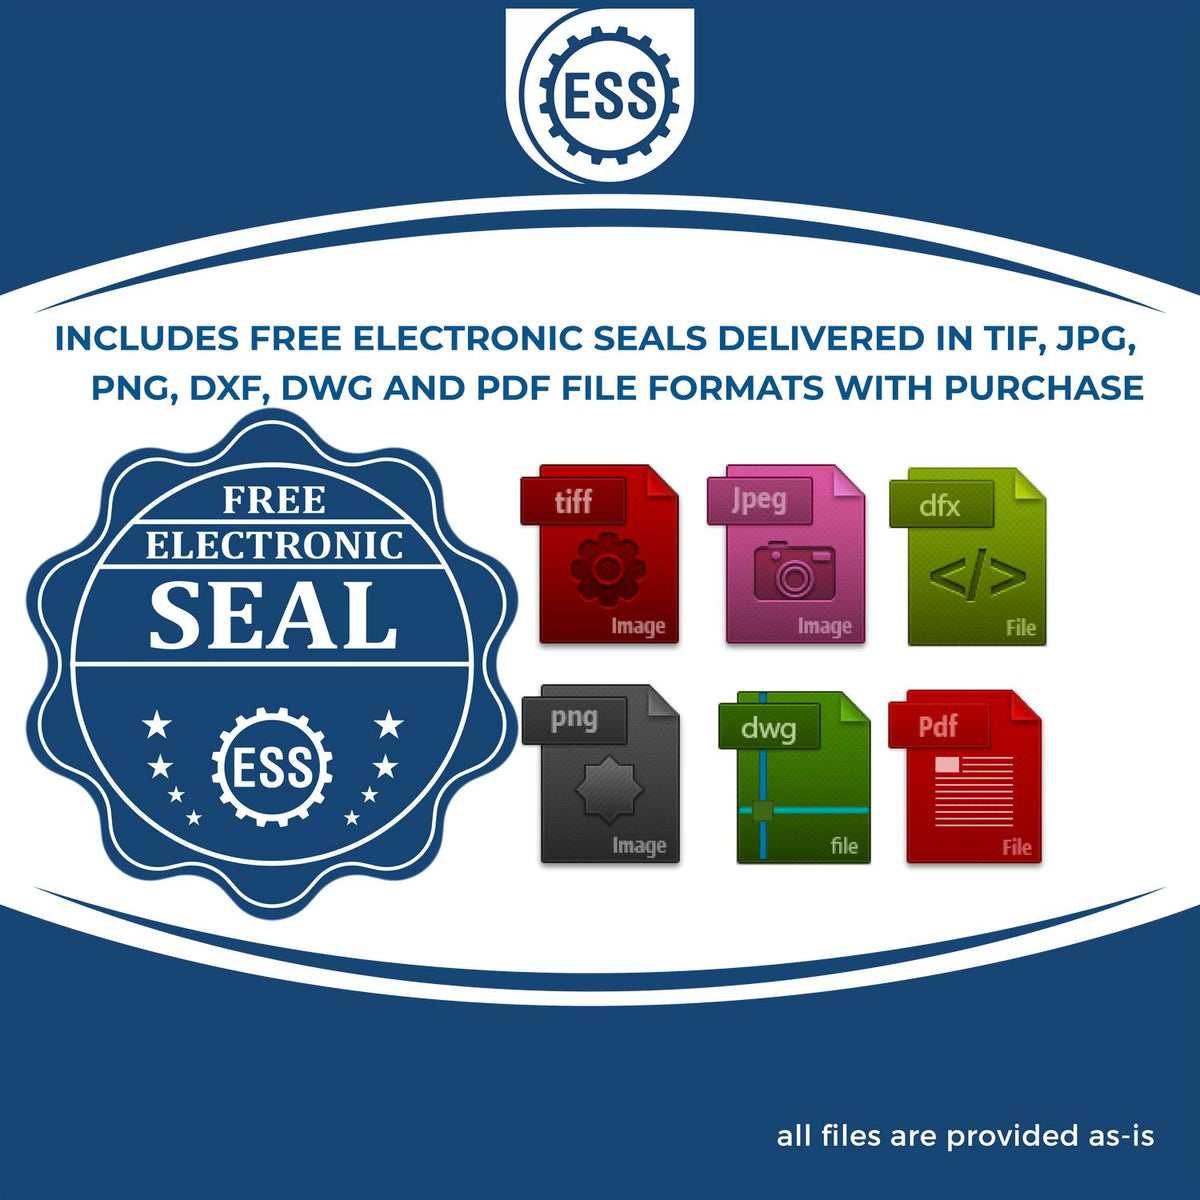 An infographic for the free electronic seal for the Soft Pocket Delaware Landscape Architect Embosser illustrating the different file type icons such as DXF, DWG, TIF, JPG and PNG.